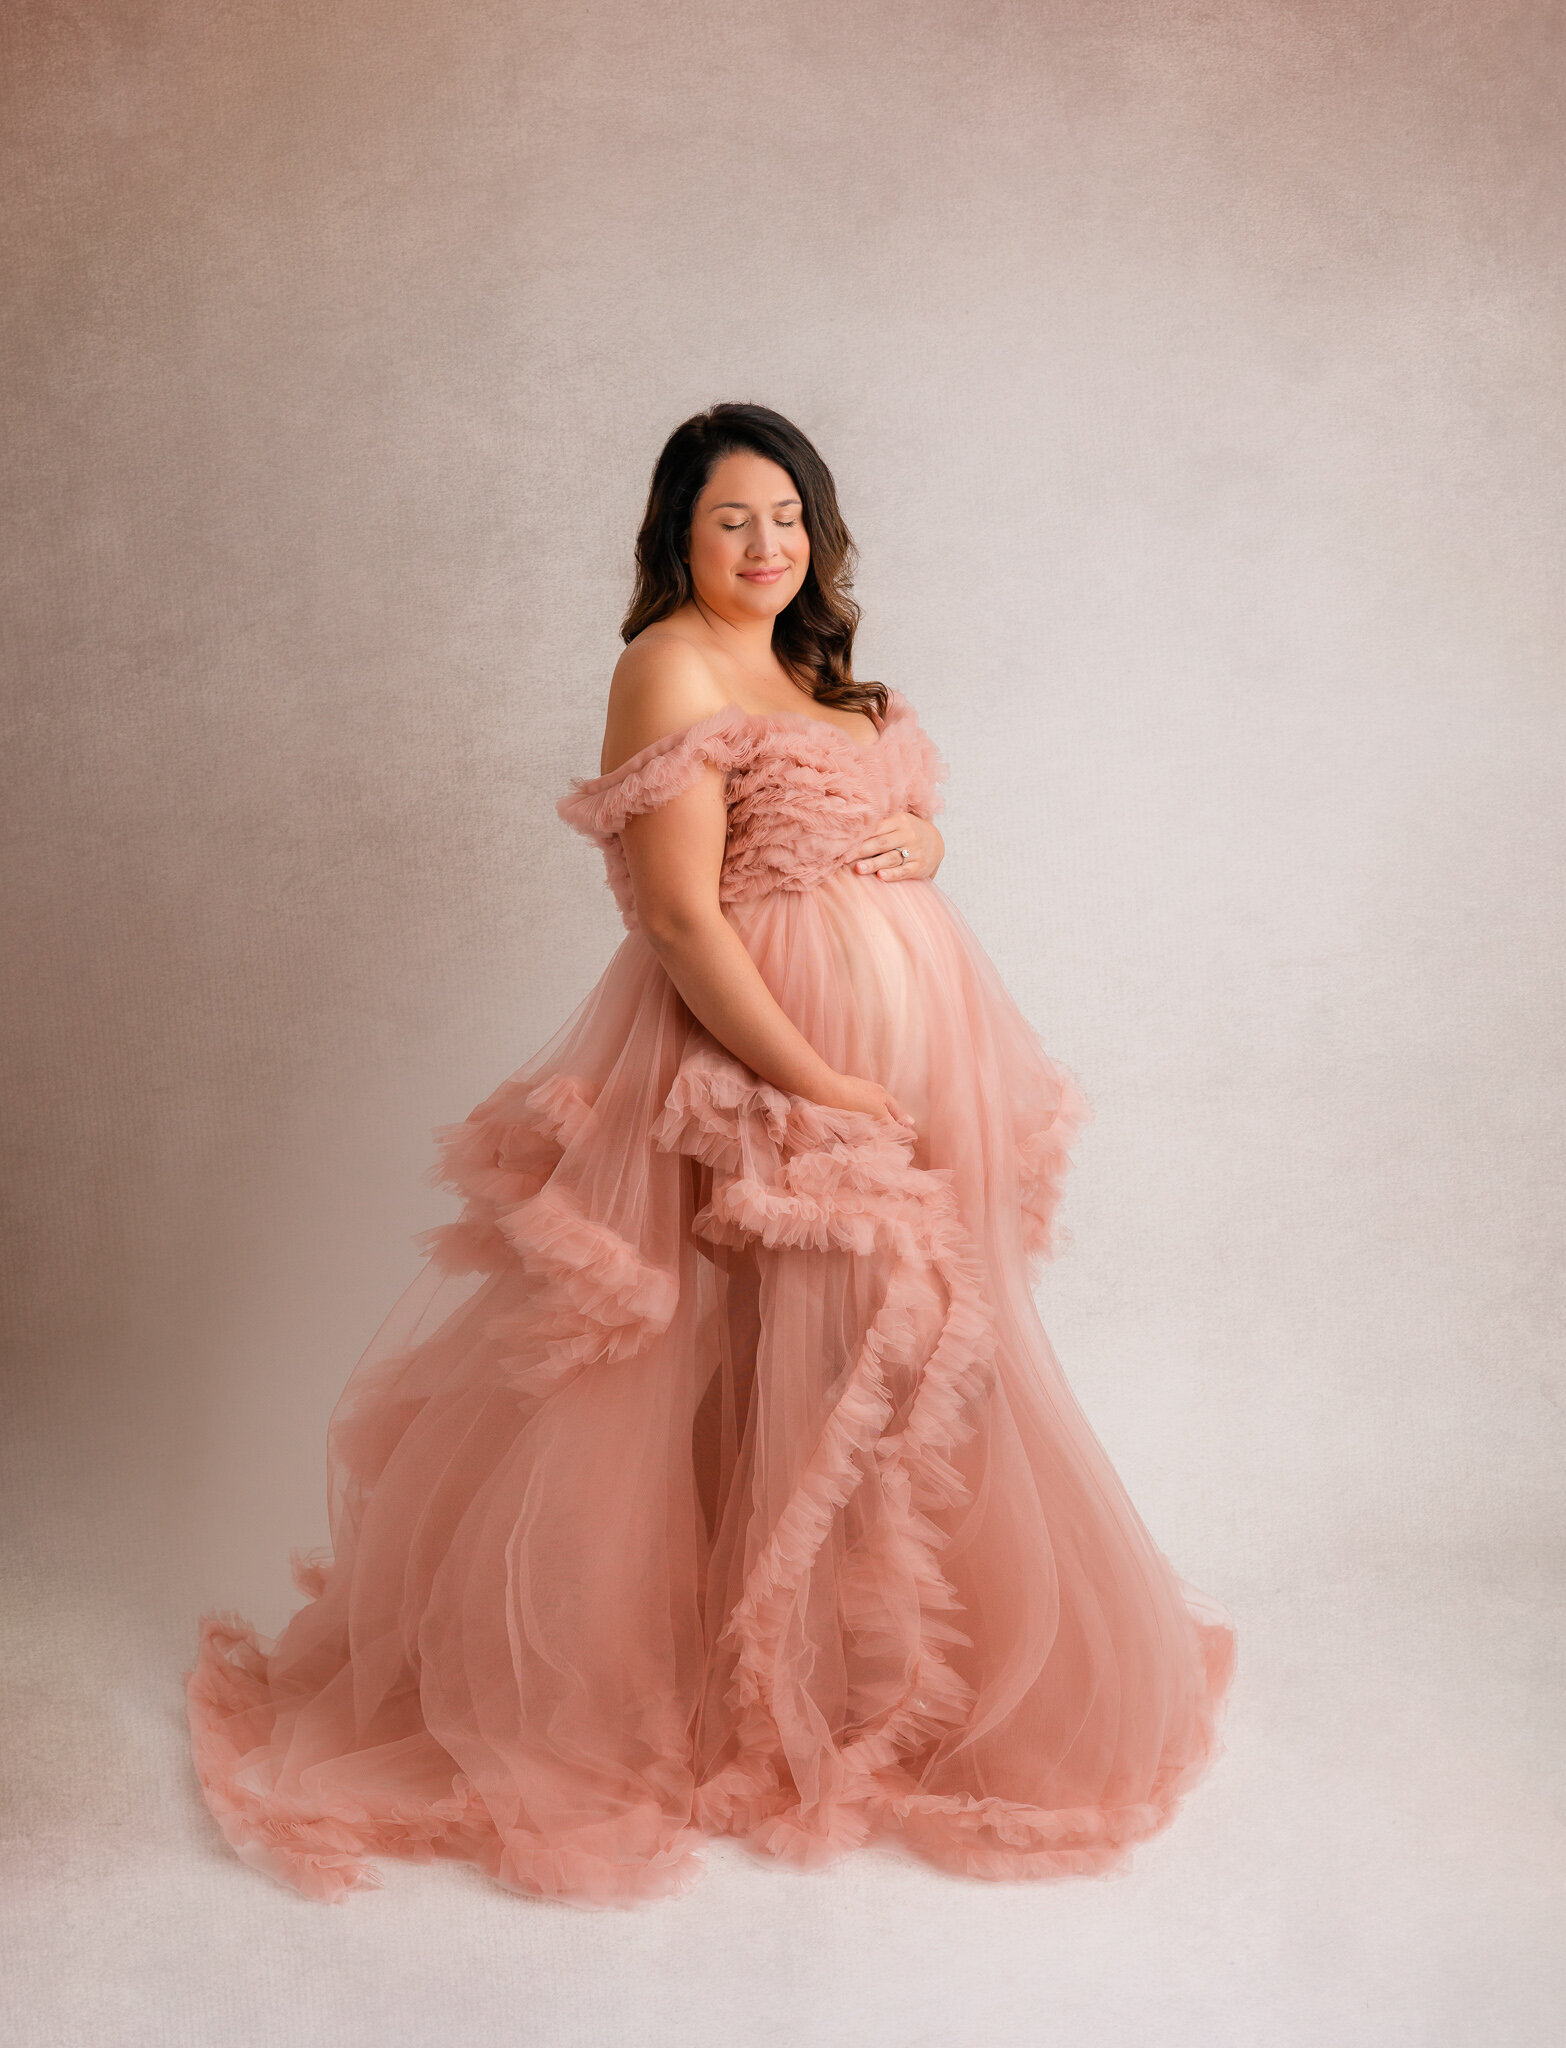 Mom wearing a pink dress holding belly during maternity photoshoot in studio